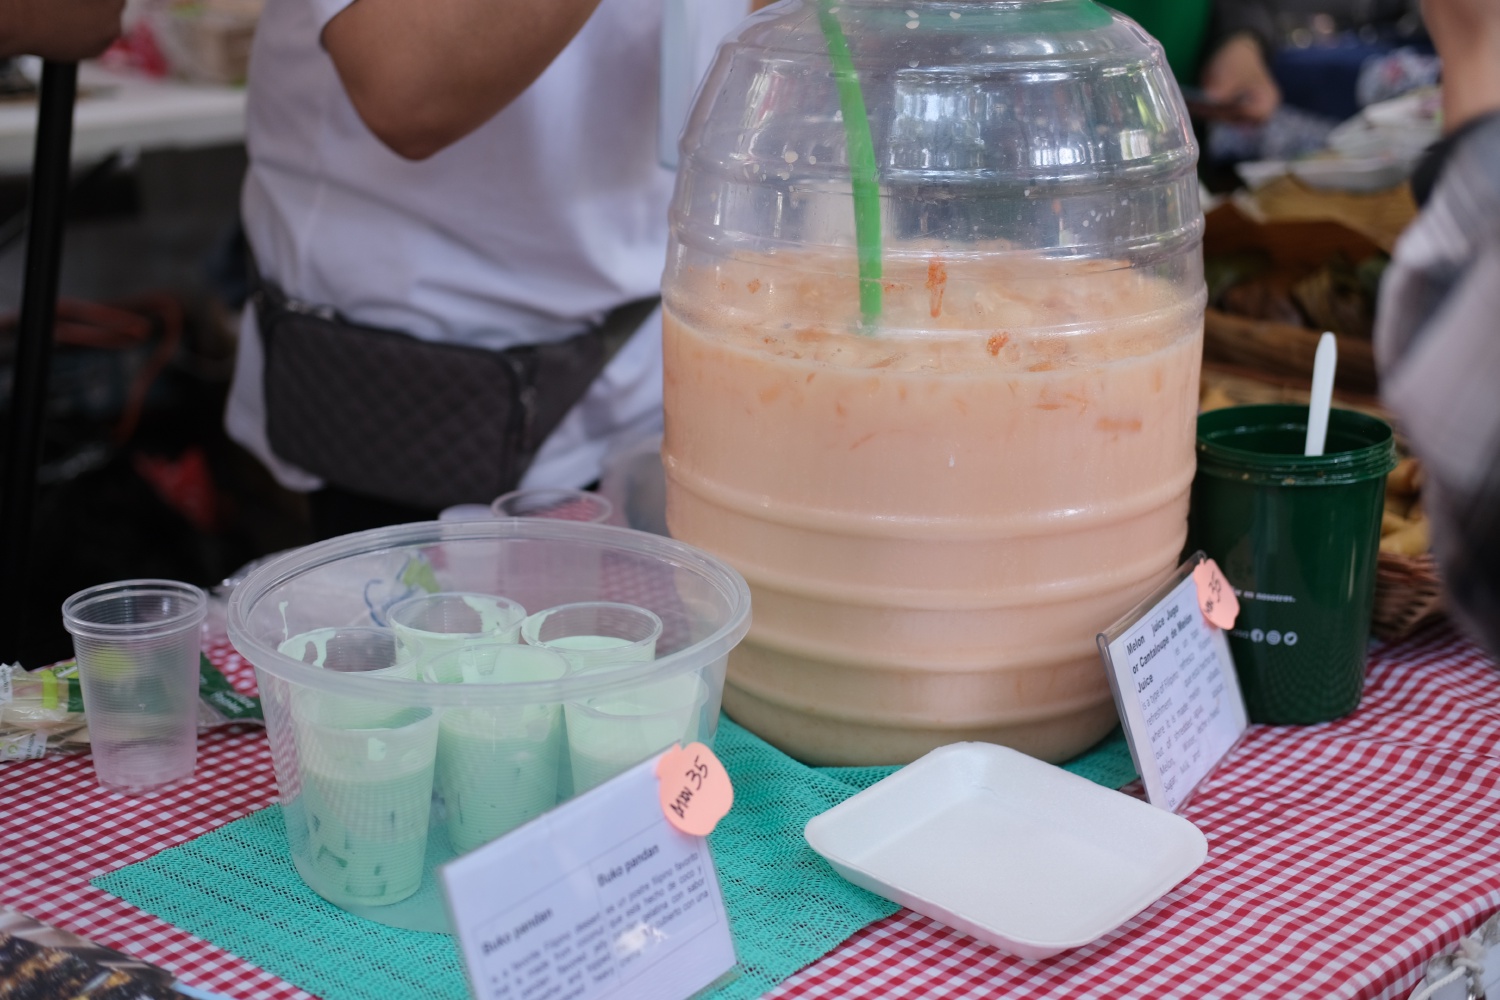 Alex loved the Buko Pandan and the Melon drink!